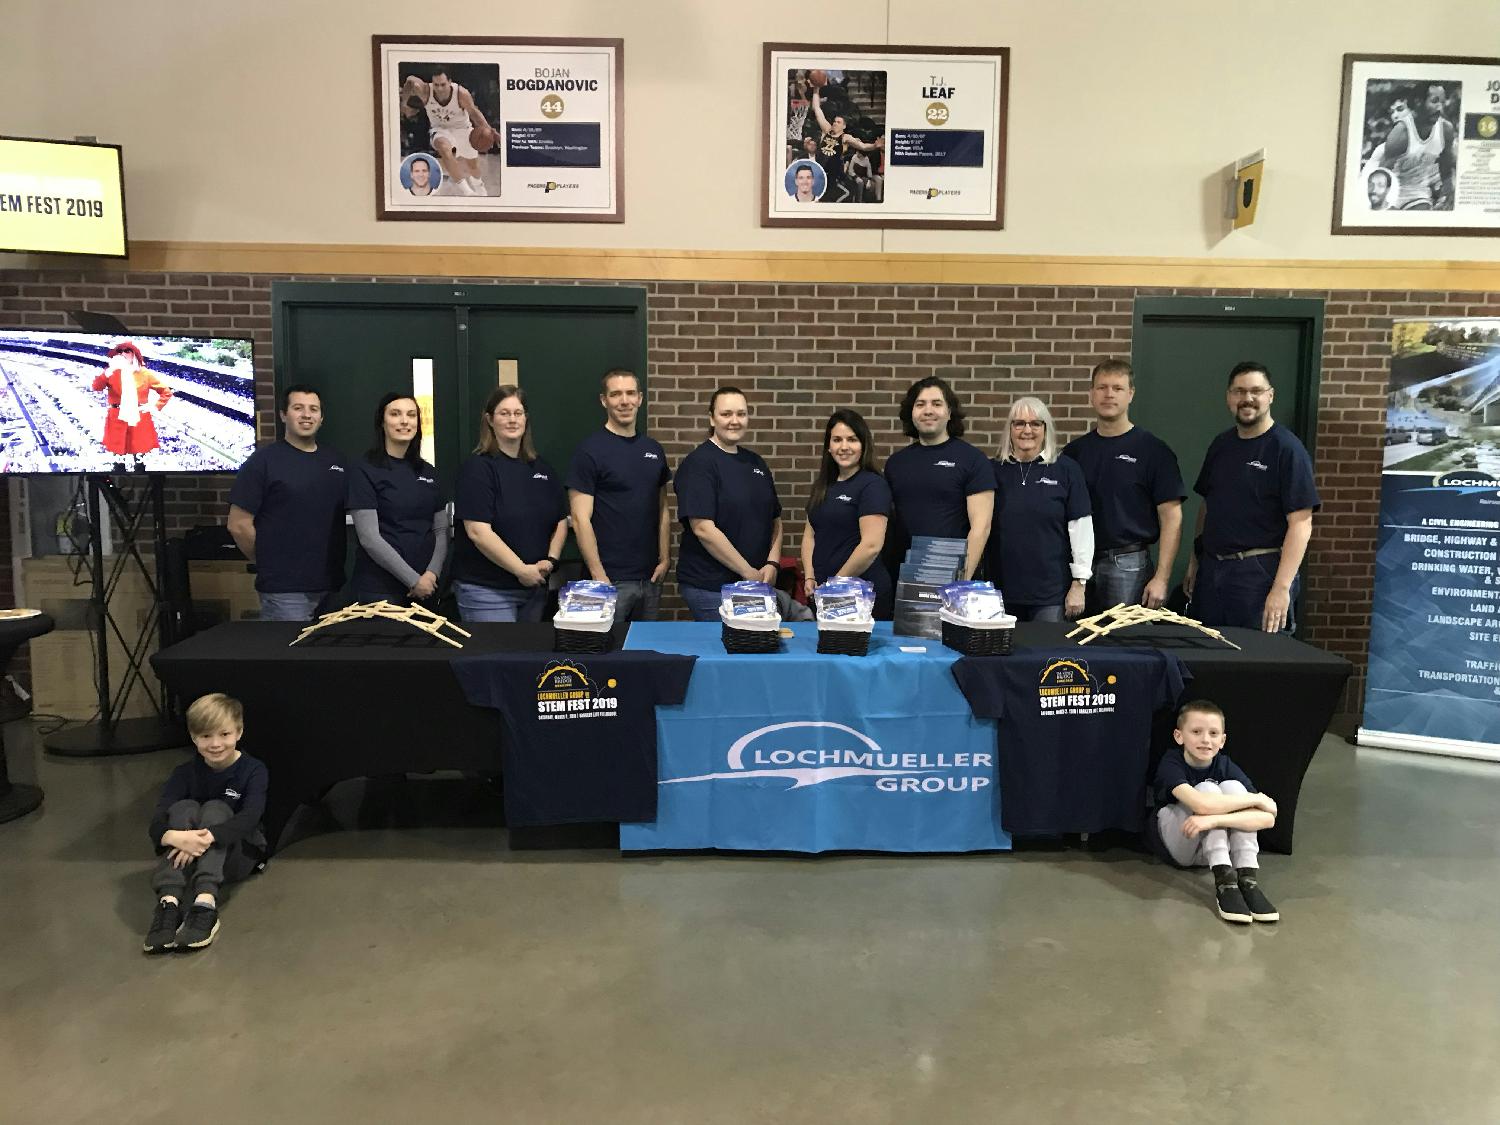 Building da Vinci bridges at the Indiana Pacer's STEM fest to promote engineering to kids with this fun, hands-on activity.